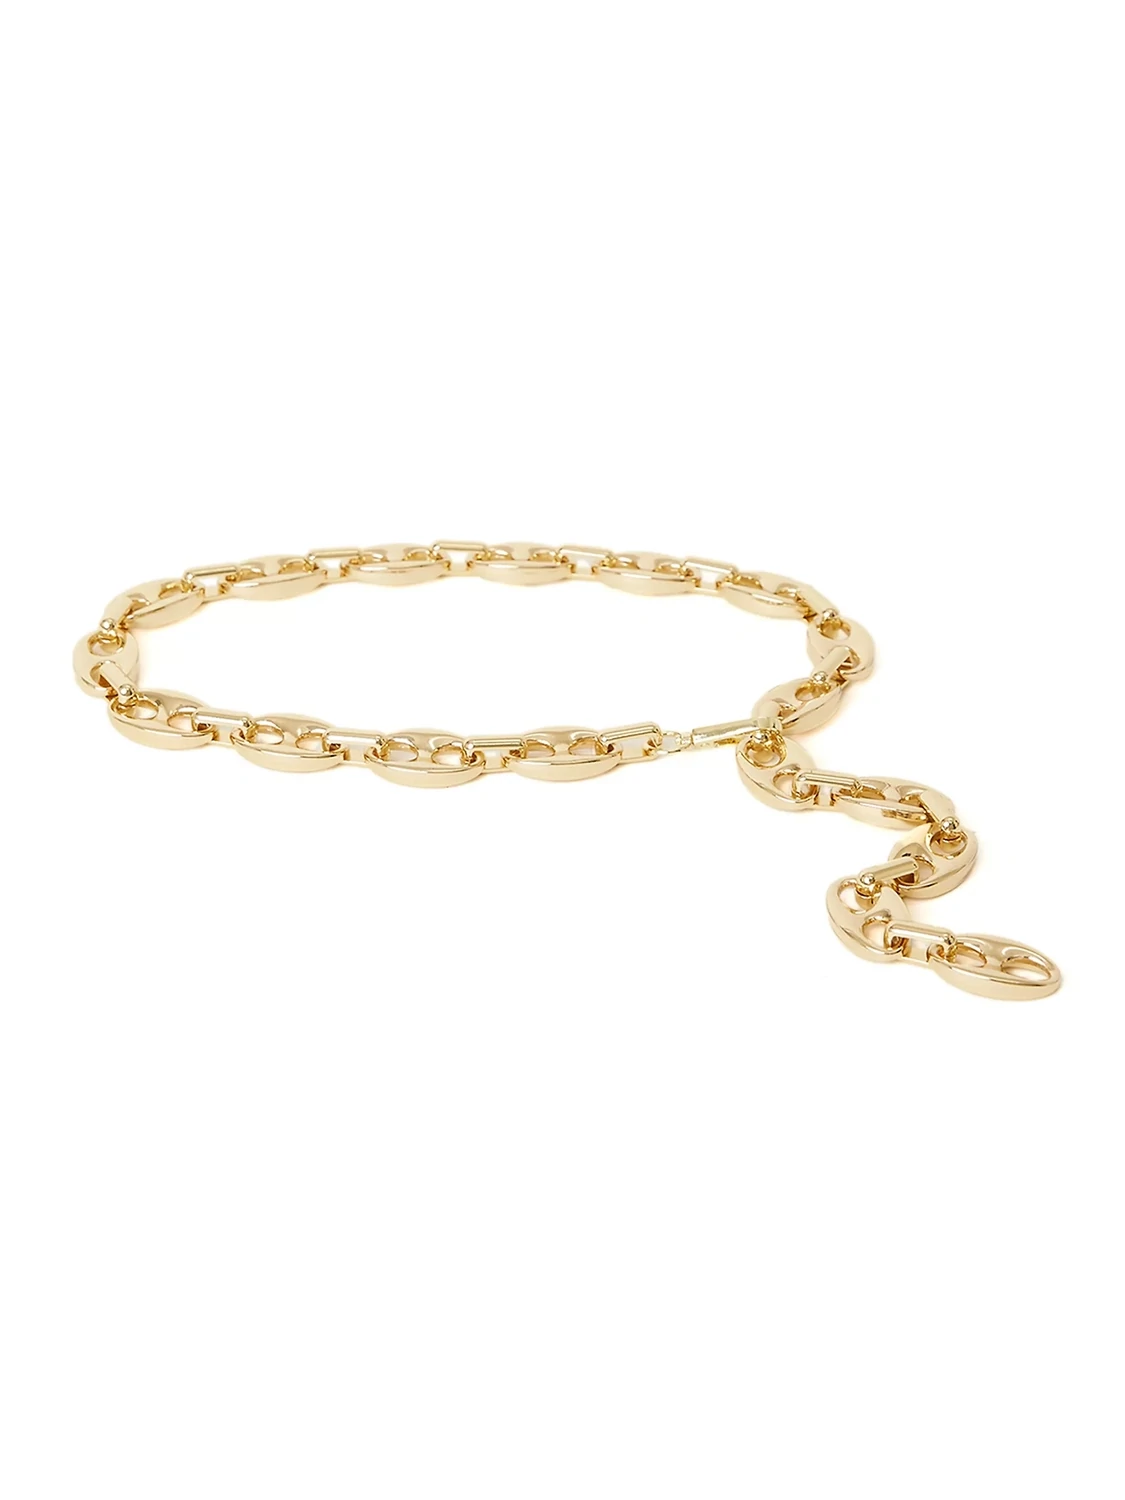 Mavery Chain, Color: Gold